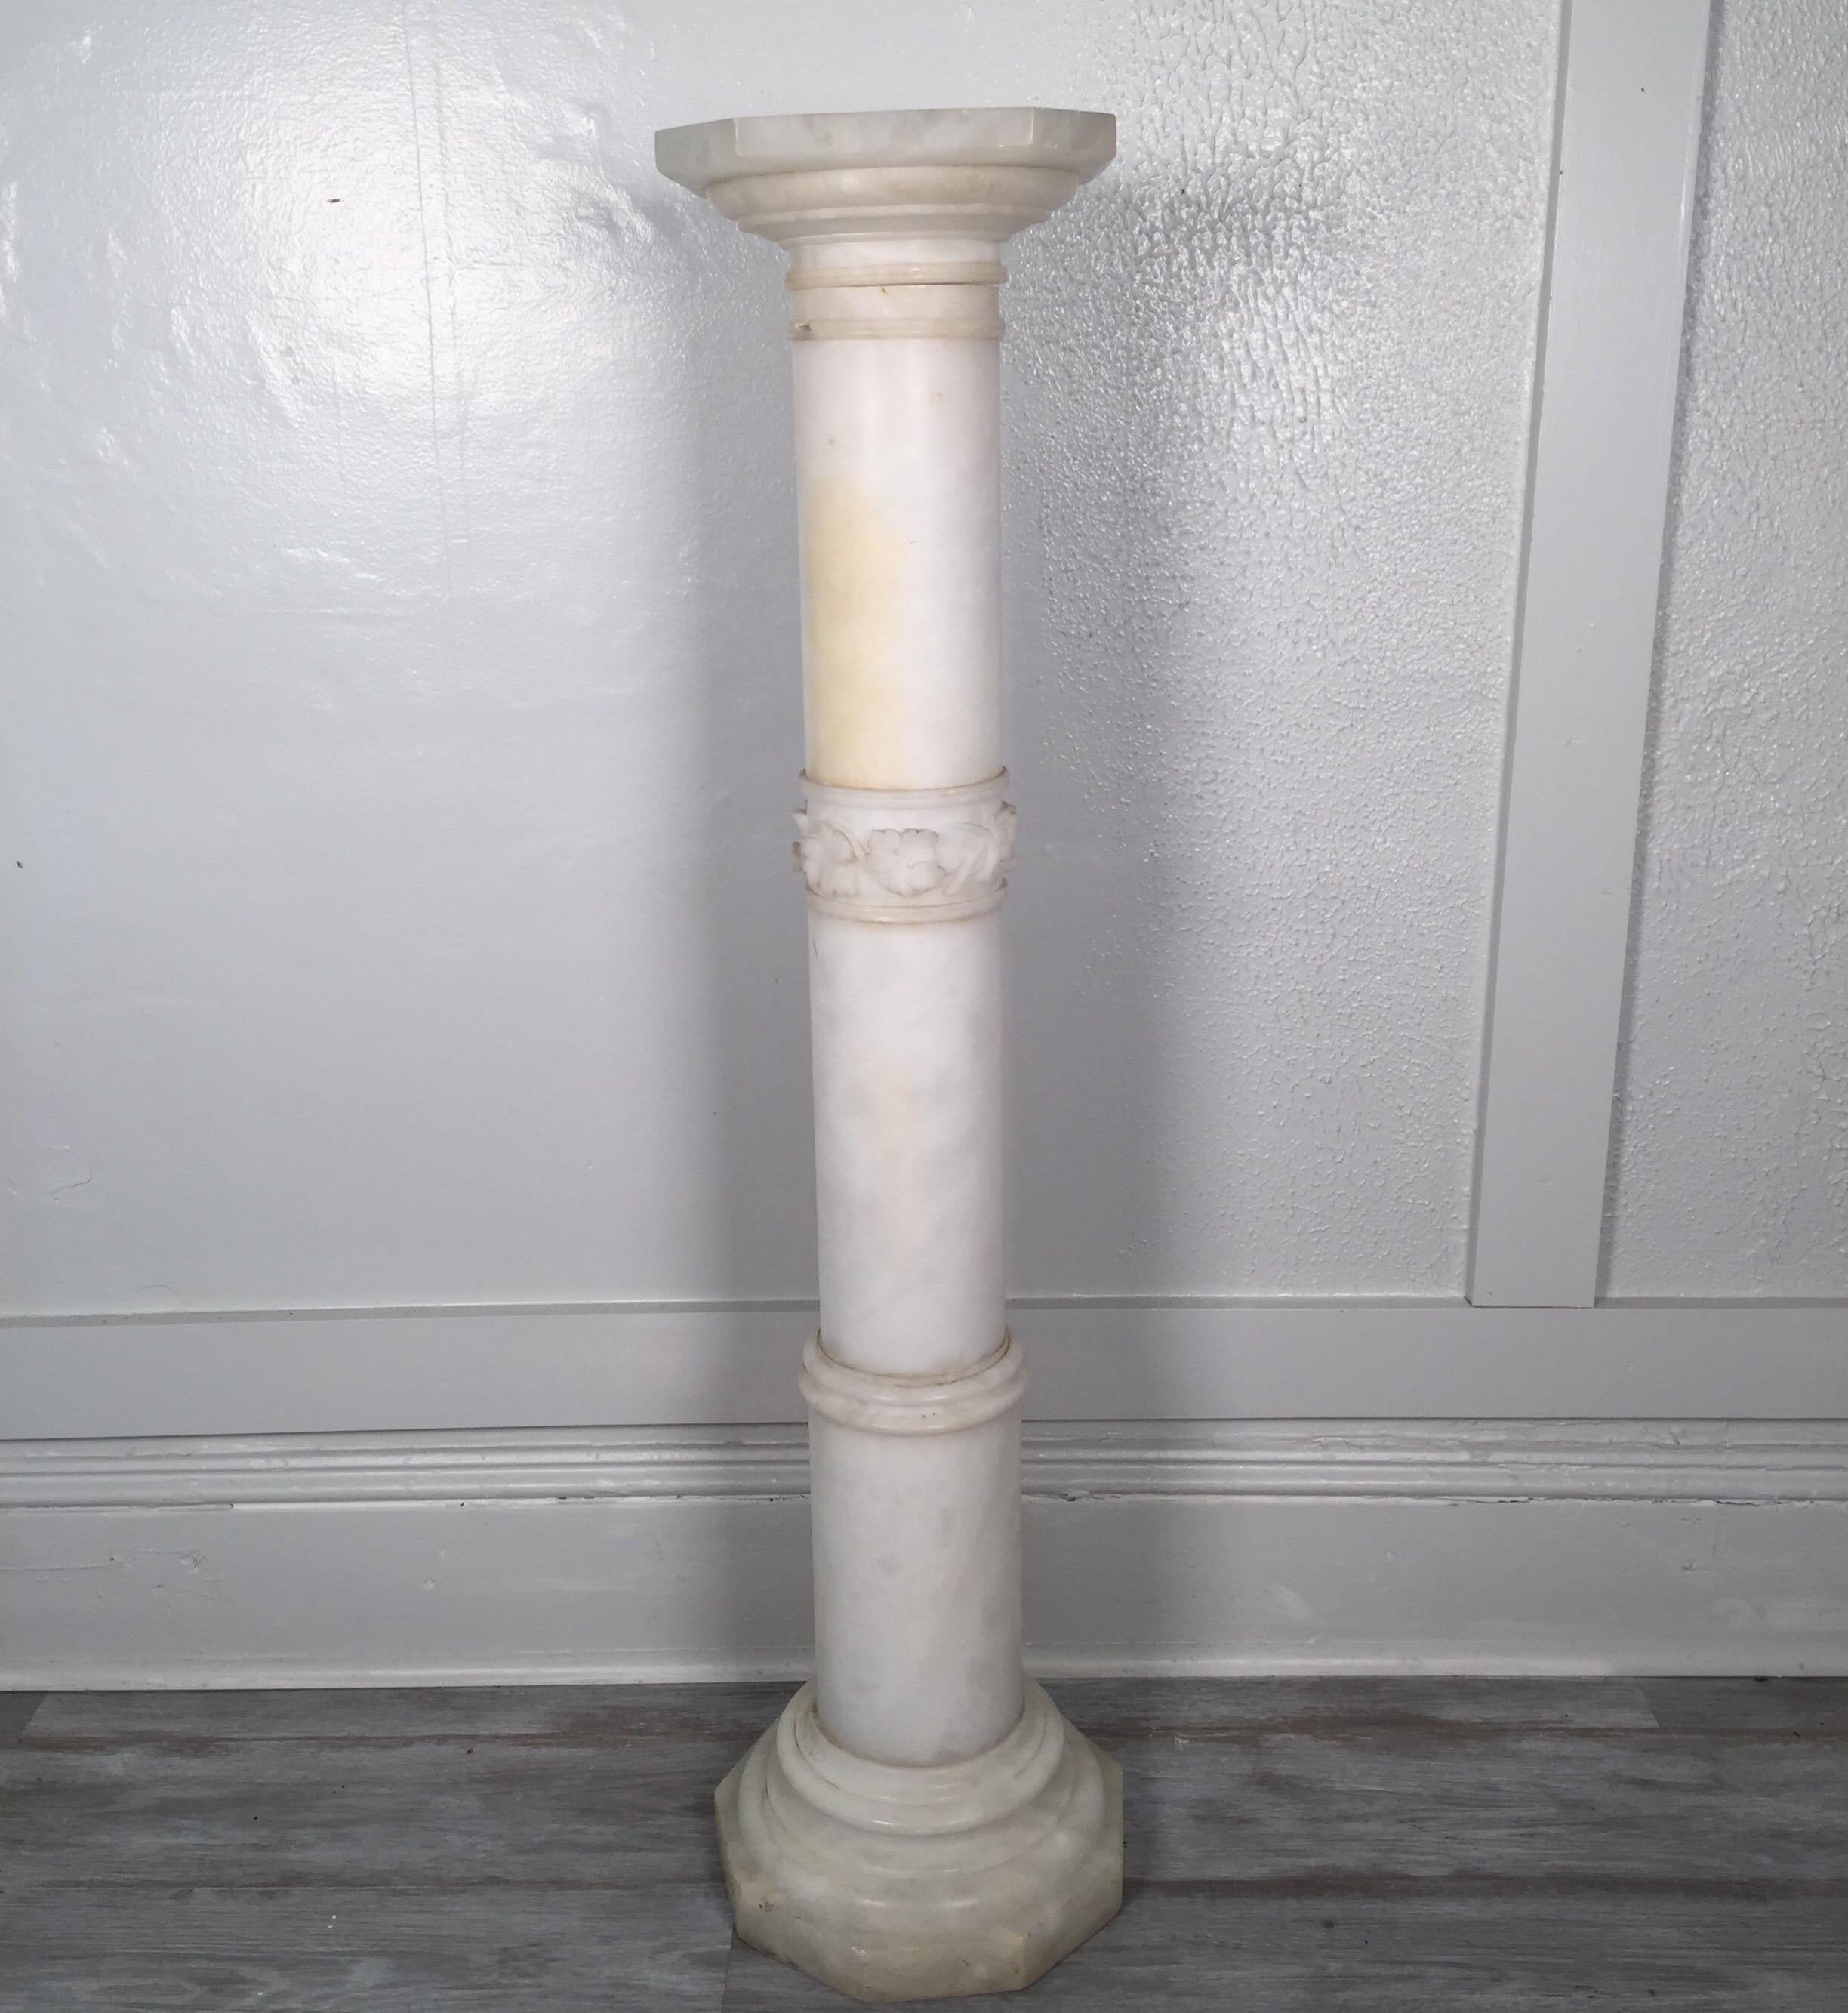 White Italian marble pedestal with top that rotates, circa 1900s
Very nice original condition
Dimensions: Top 10